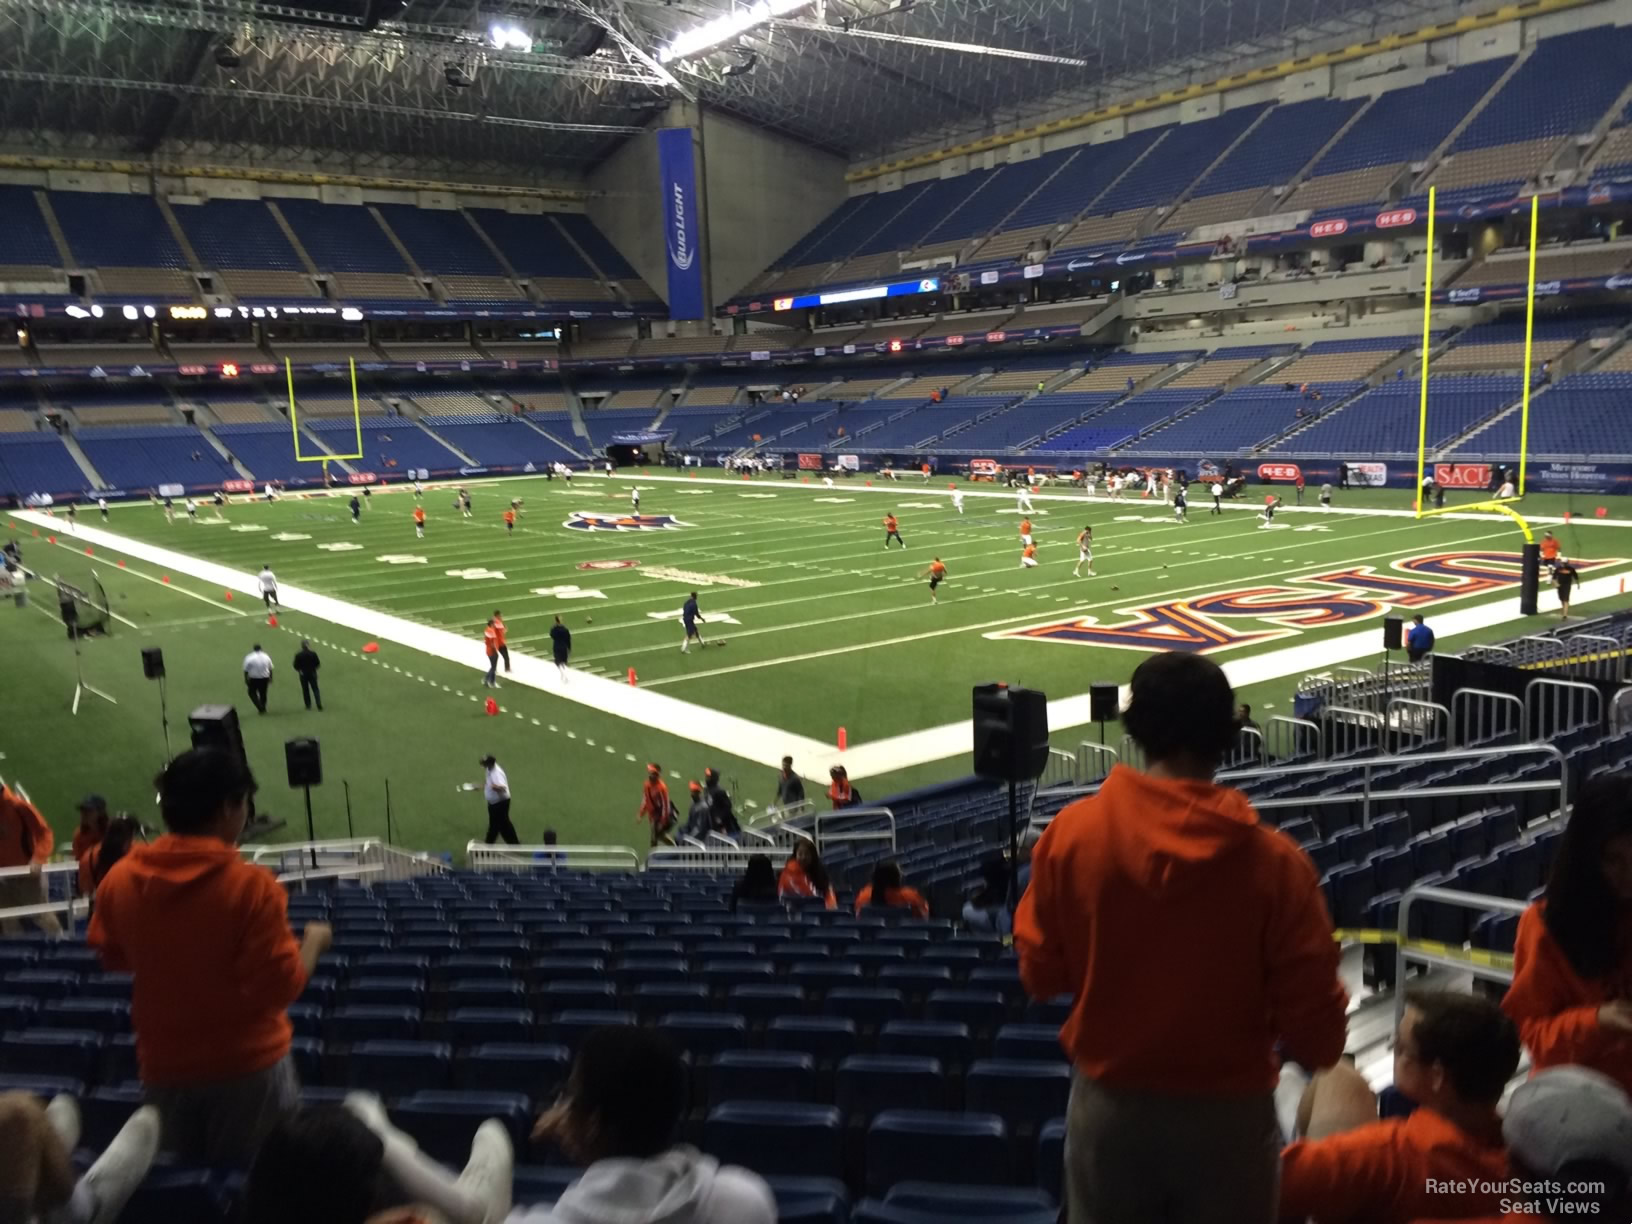 section 127, row 18 seat view  for football - alamodome